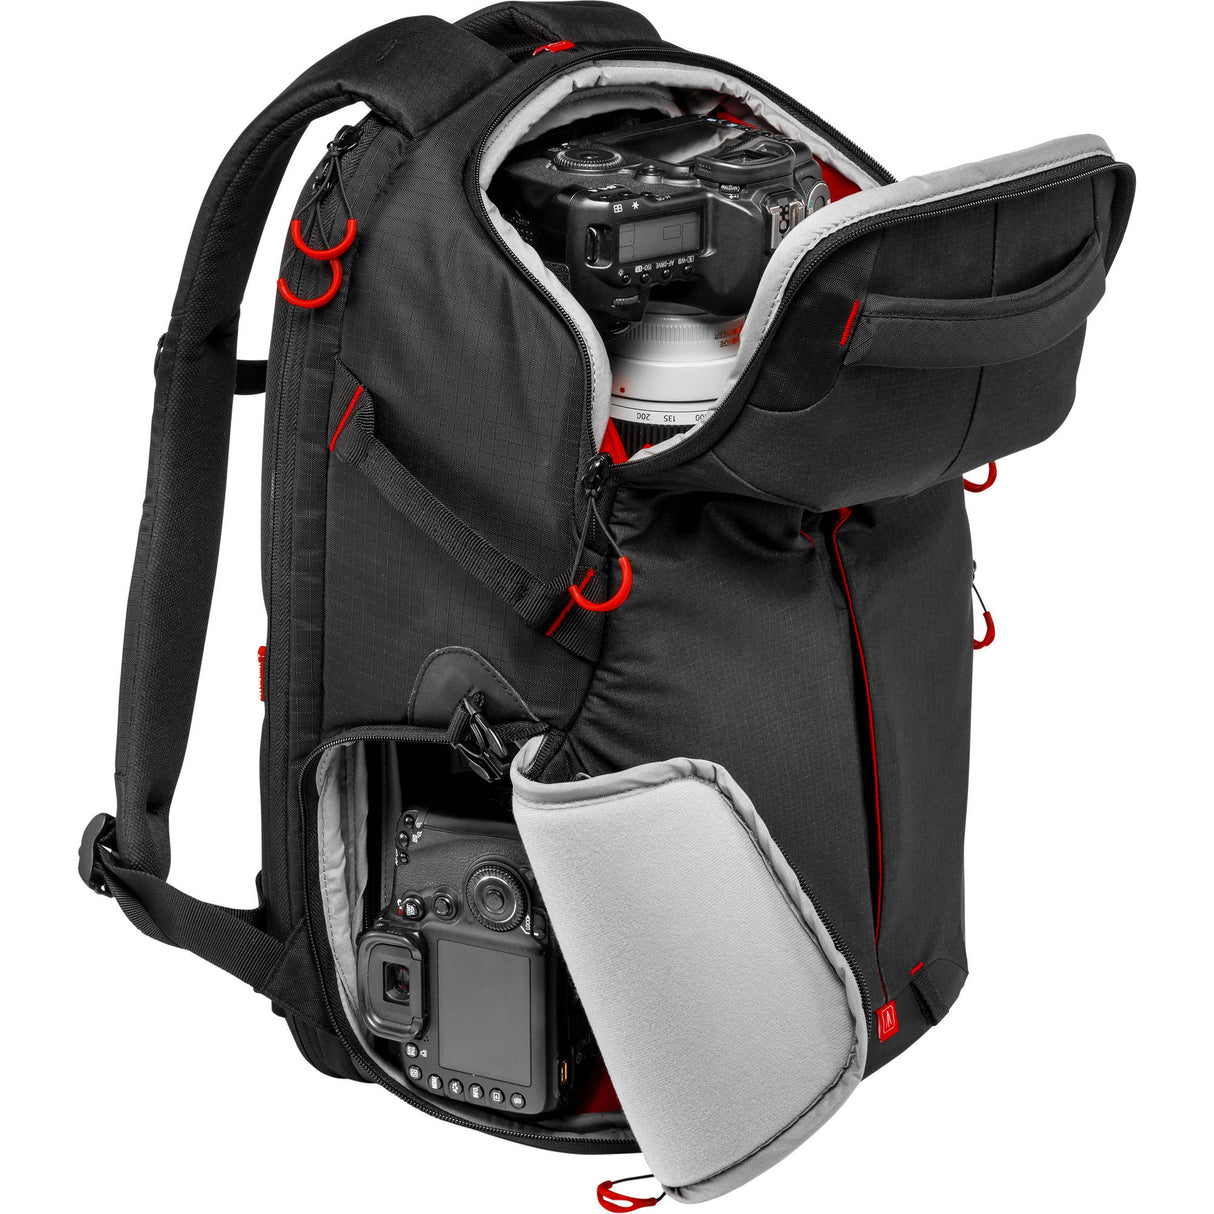 Manfrotto Pro Light RedBee-210 Backpack (Black)